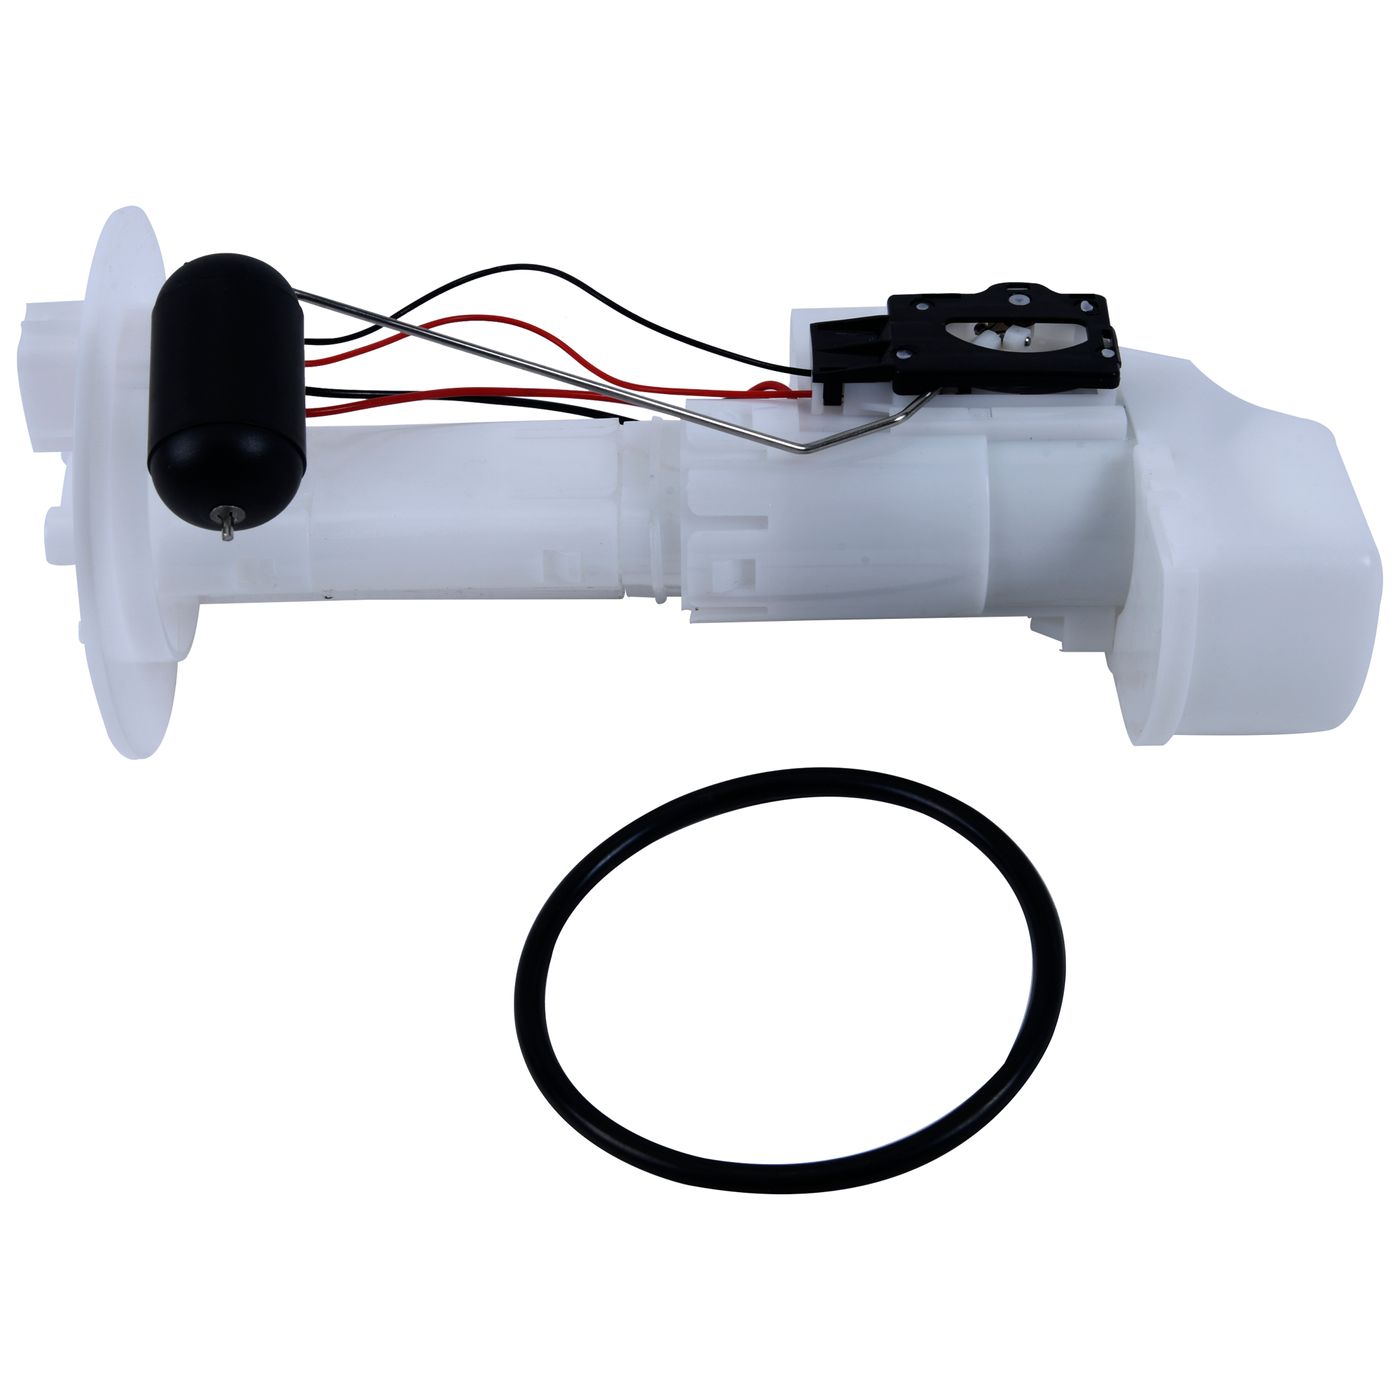 Wrp Fuel Pump Modules - WRP471032 image